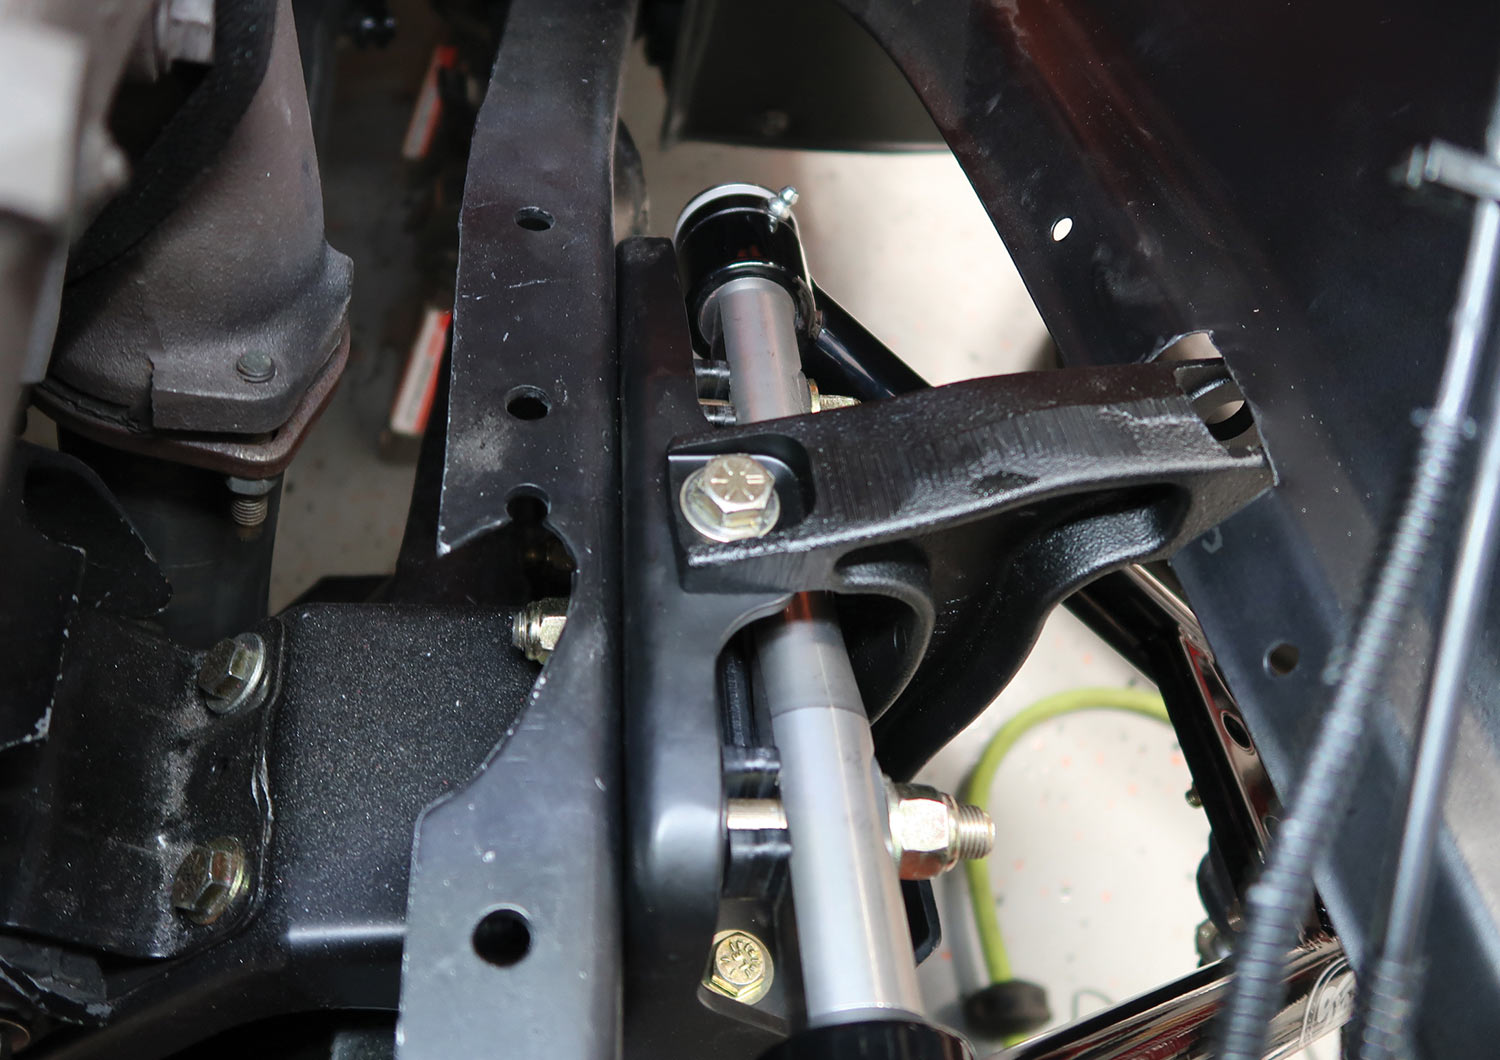 to provide clearance for the new steering shaft from the column to the rack, the top of the driver side framerail has to be notched